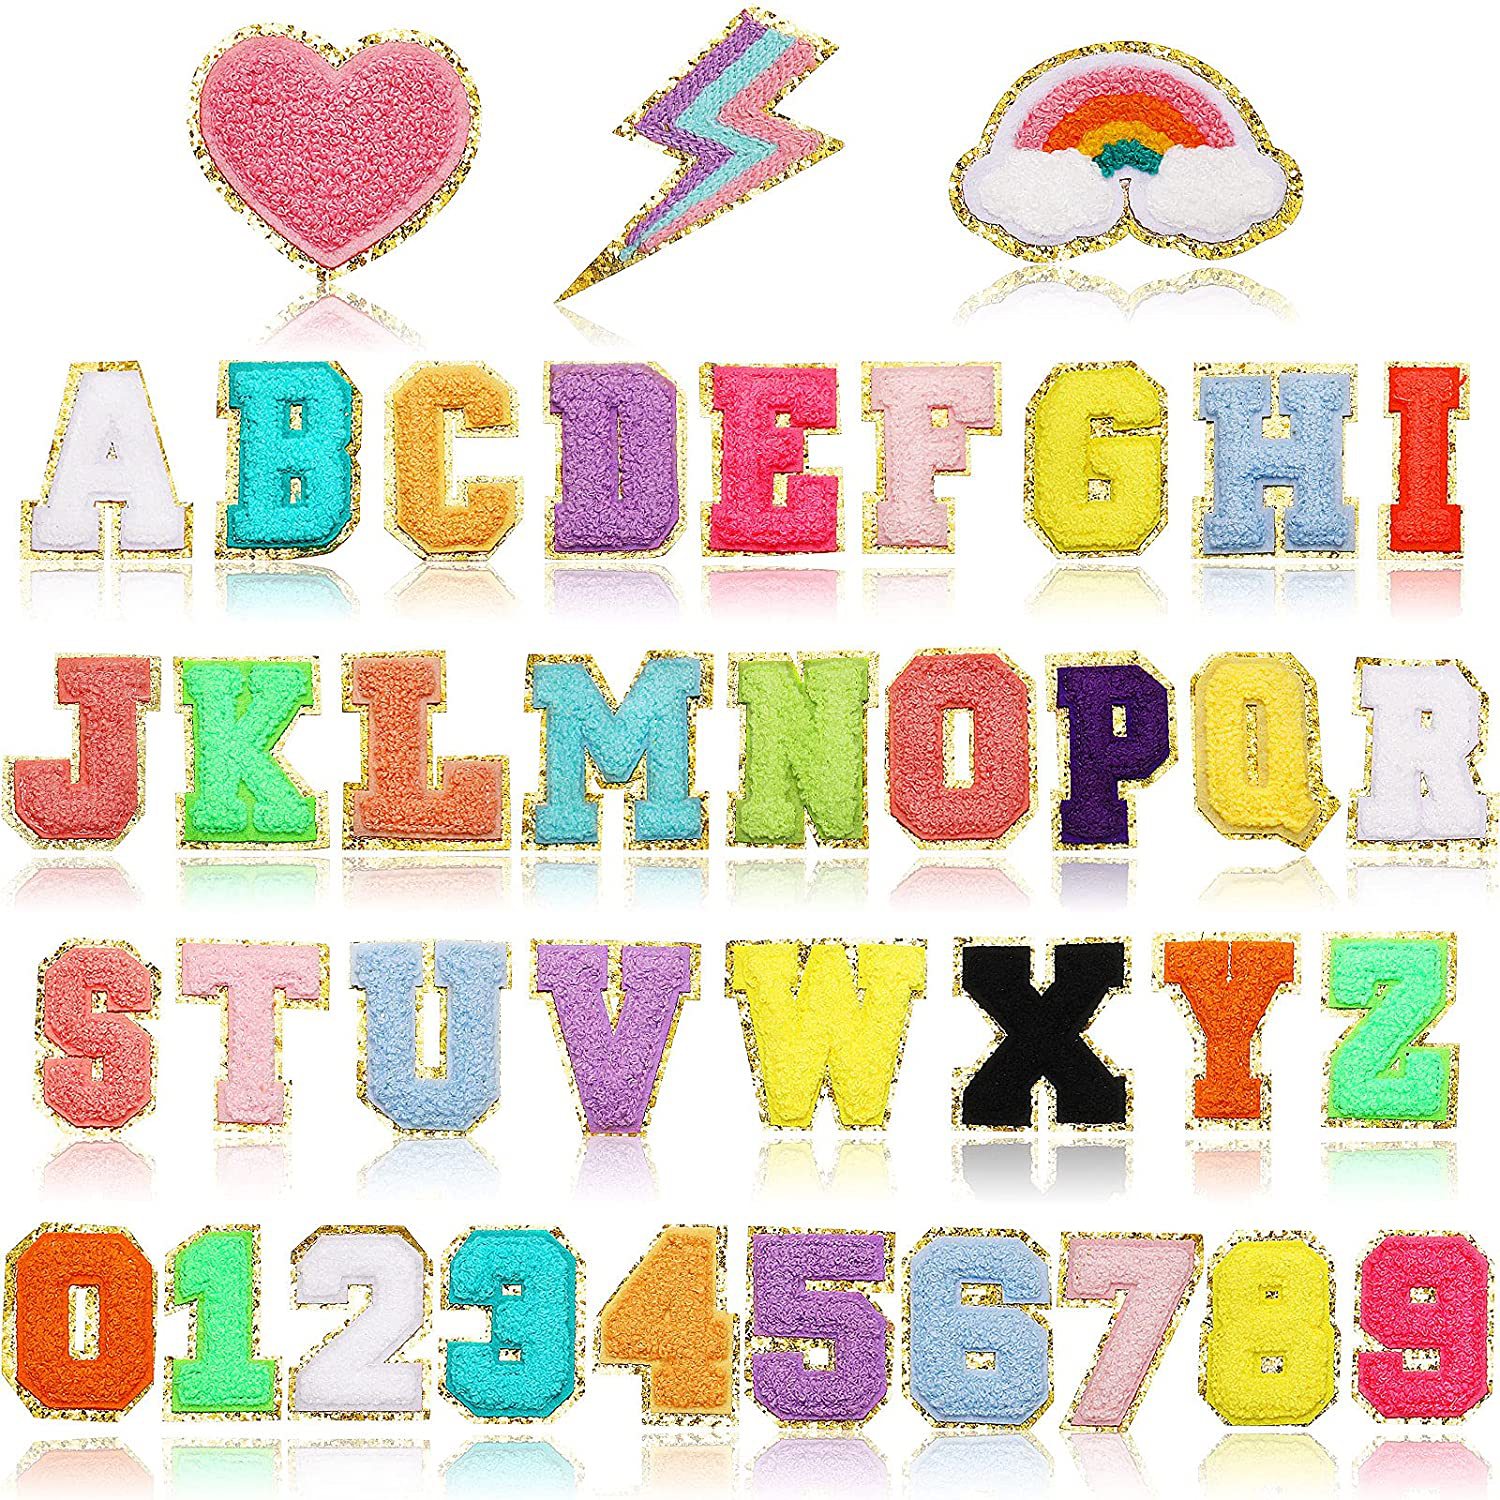 xiao Tian Towel Embroidery English Letters Embroidery Cloth Stickers Rainbow Lightning Patch Ironing Smiling Face Computer Embroidery Zhang Zi